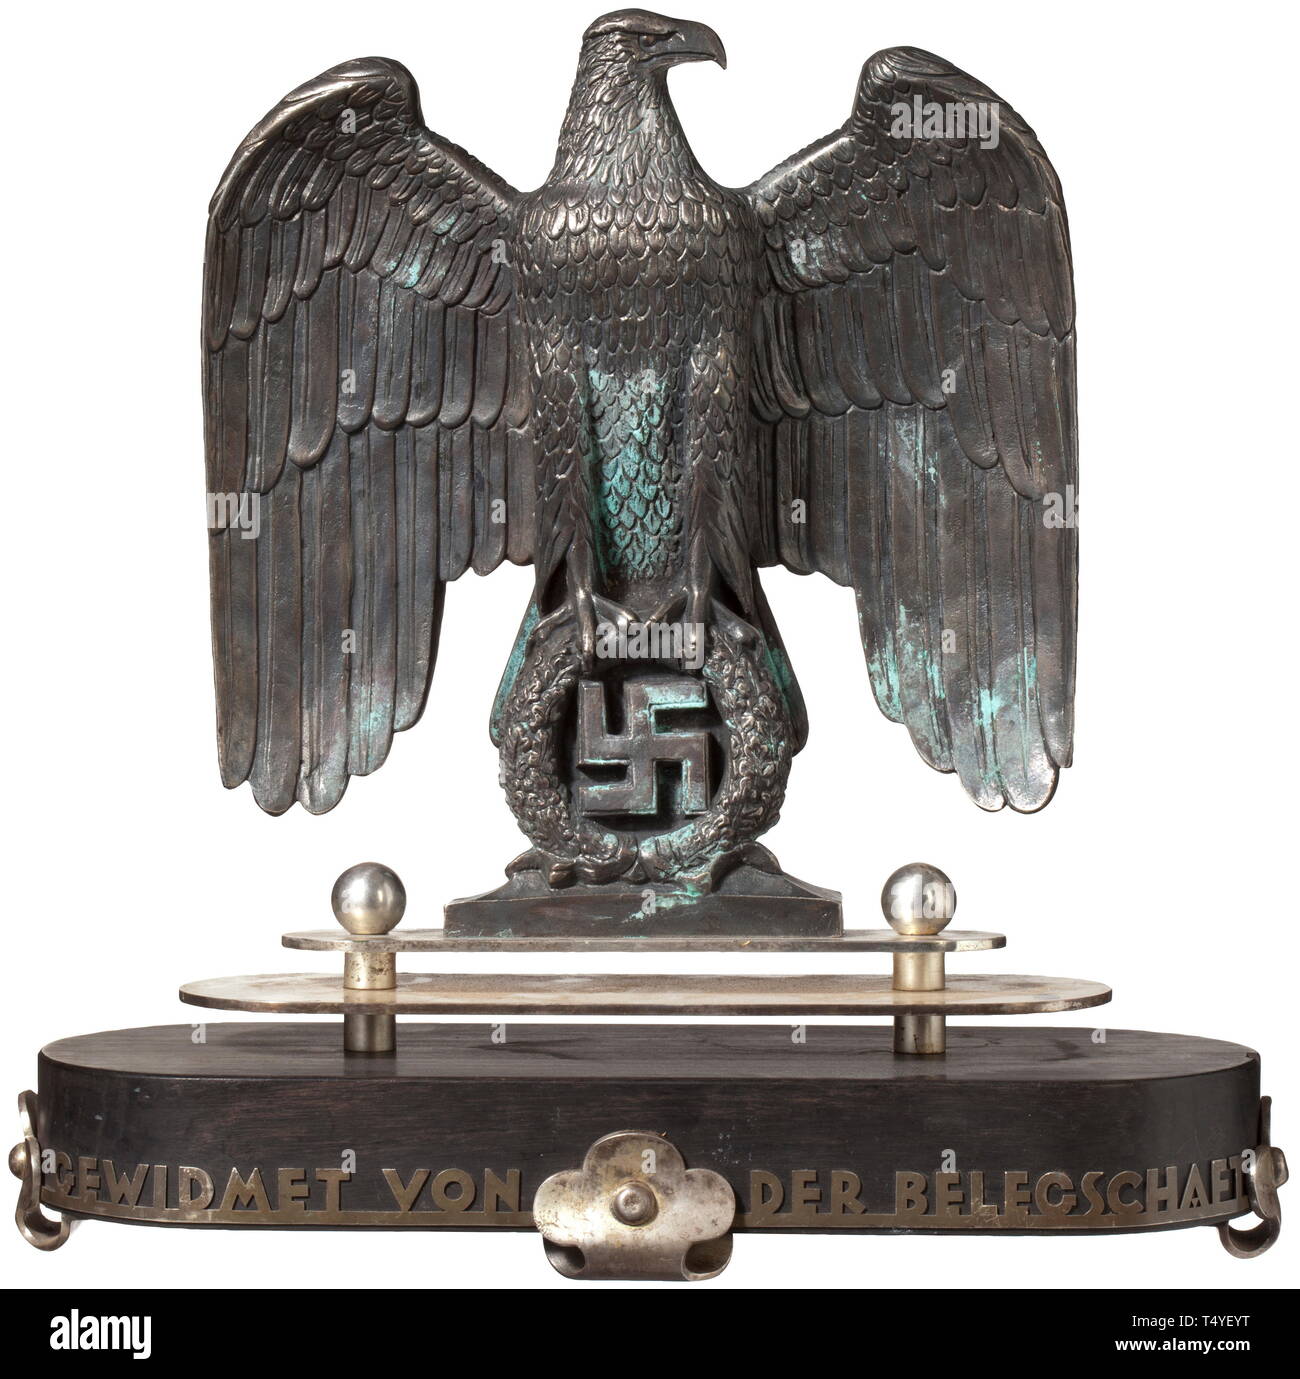 Professor Kurt Schmid-Ehmen (1901 - 1968) - a silvered bronze eagle in the shape of the eagle at the Luitpold Arena on the Nazi party rally grounds in Nuremberg. Bronze, silvered, monogrammed laterally 'K.S.E.'. The multi-piece, silvered resp. ebonised base with the presentation inscription 'Gewidmet von der Belegschaft' (Bestowed by the staff). Detailed miniature sculpture. Height 26 cm, total height 35 cm. The silvering probably later or renewed. Modelled on the seven-metre tall original at the Nazi party rally grounds. Prof. Kurt Schmid-Ehmen, the 'eagle maker', is consi, Editorial-Use-Only Stock Photo